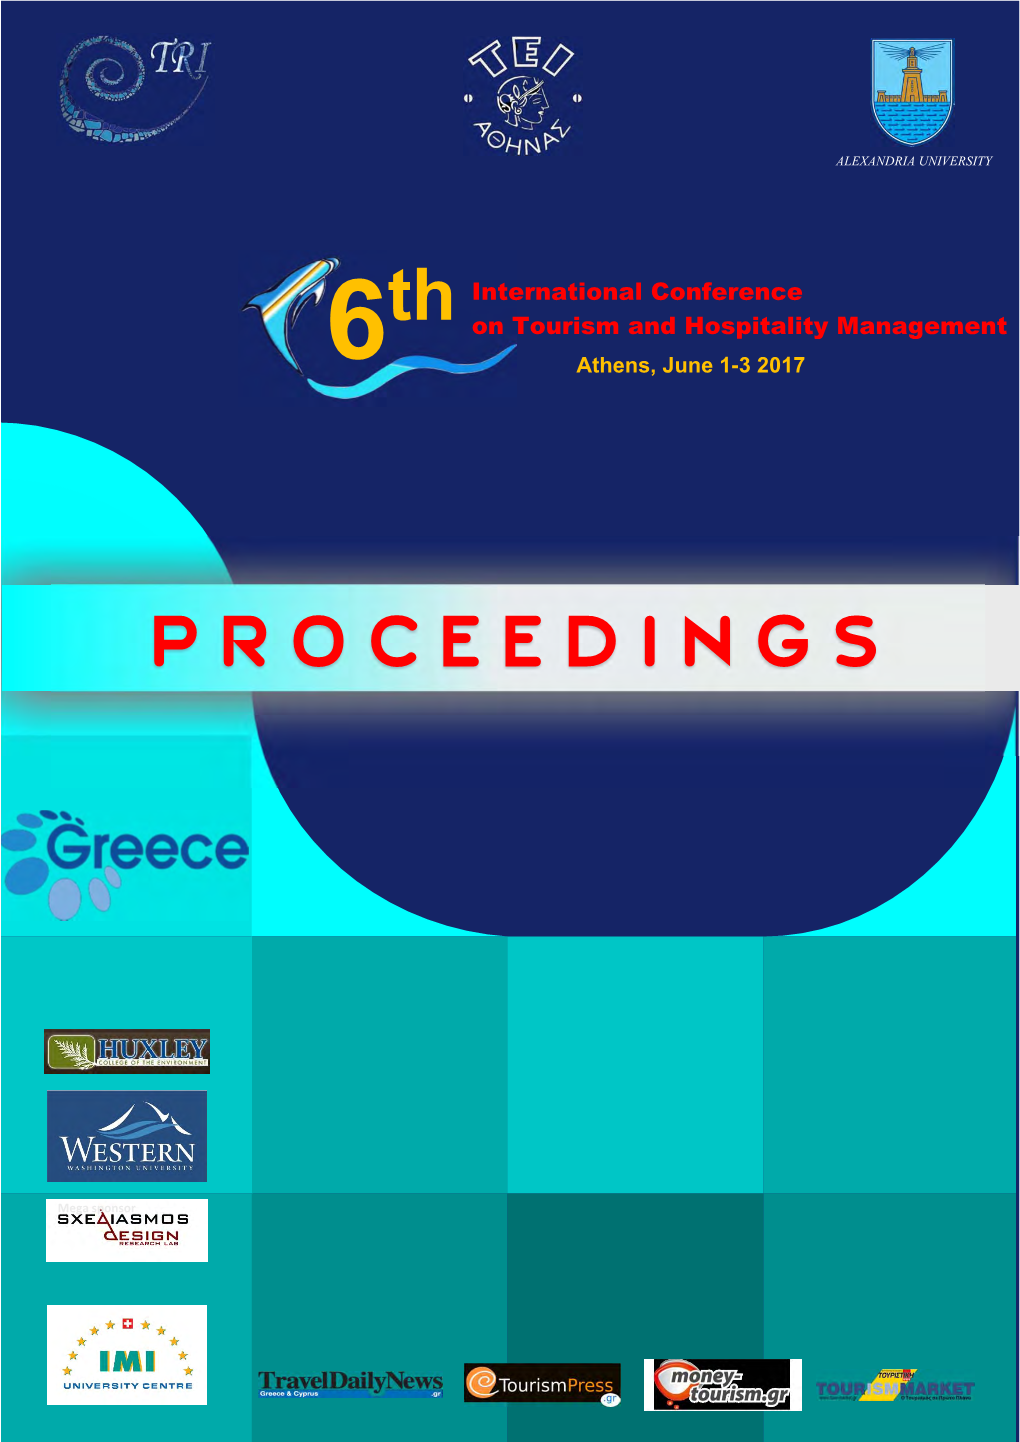 Th International Conference on Tourism and Hospitality Management, 1-3 June 2017, Athens, Greece